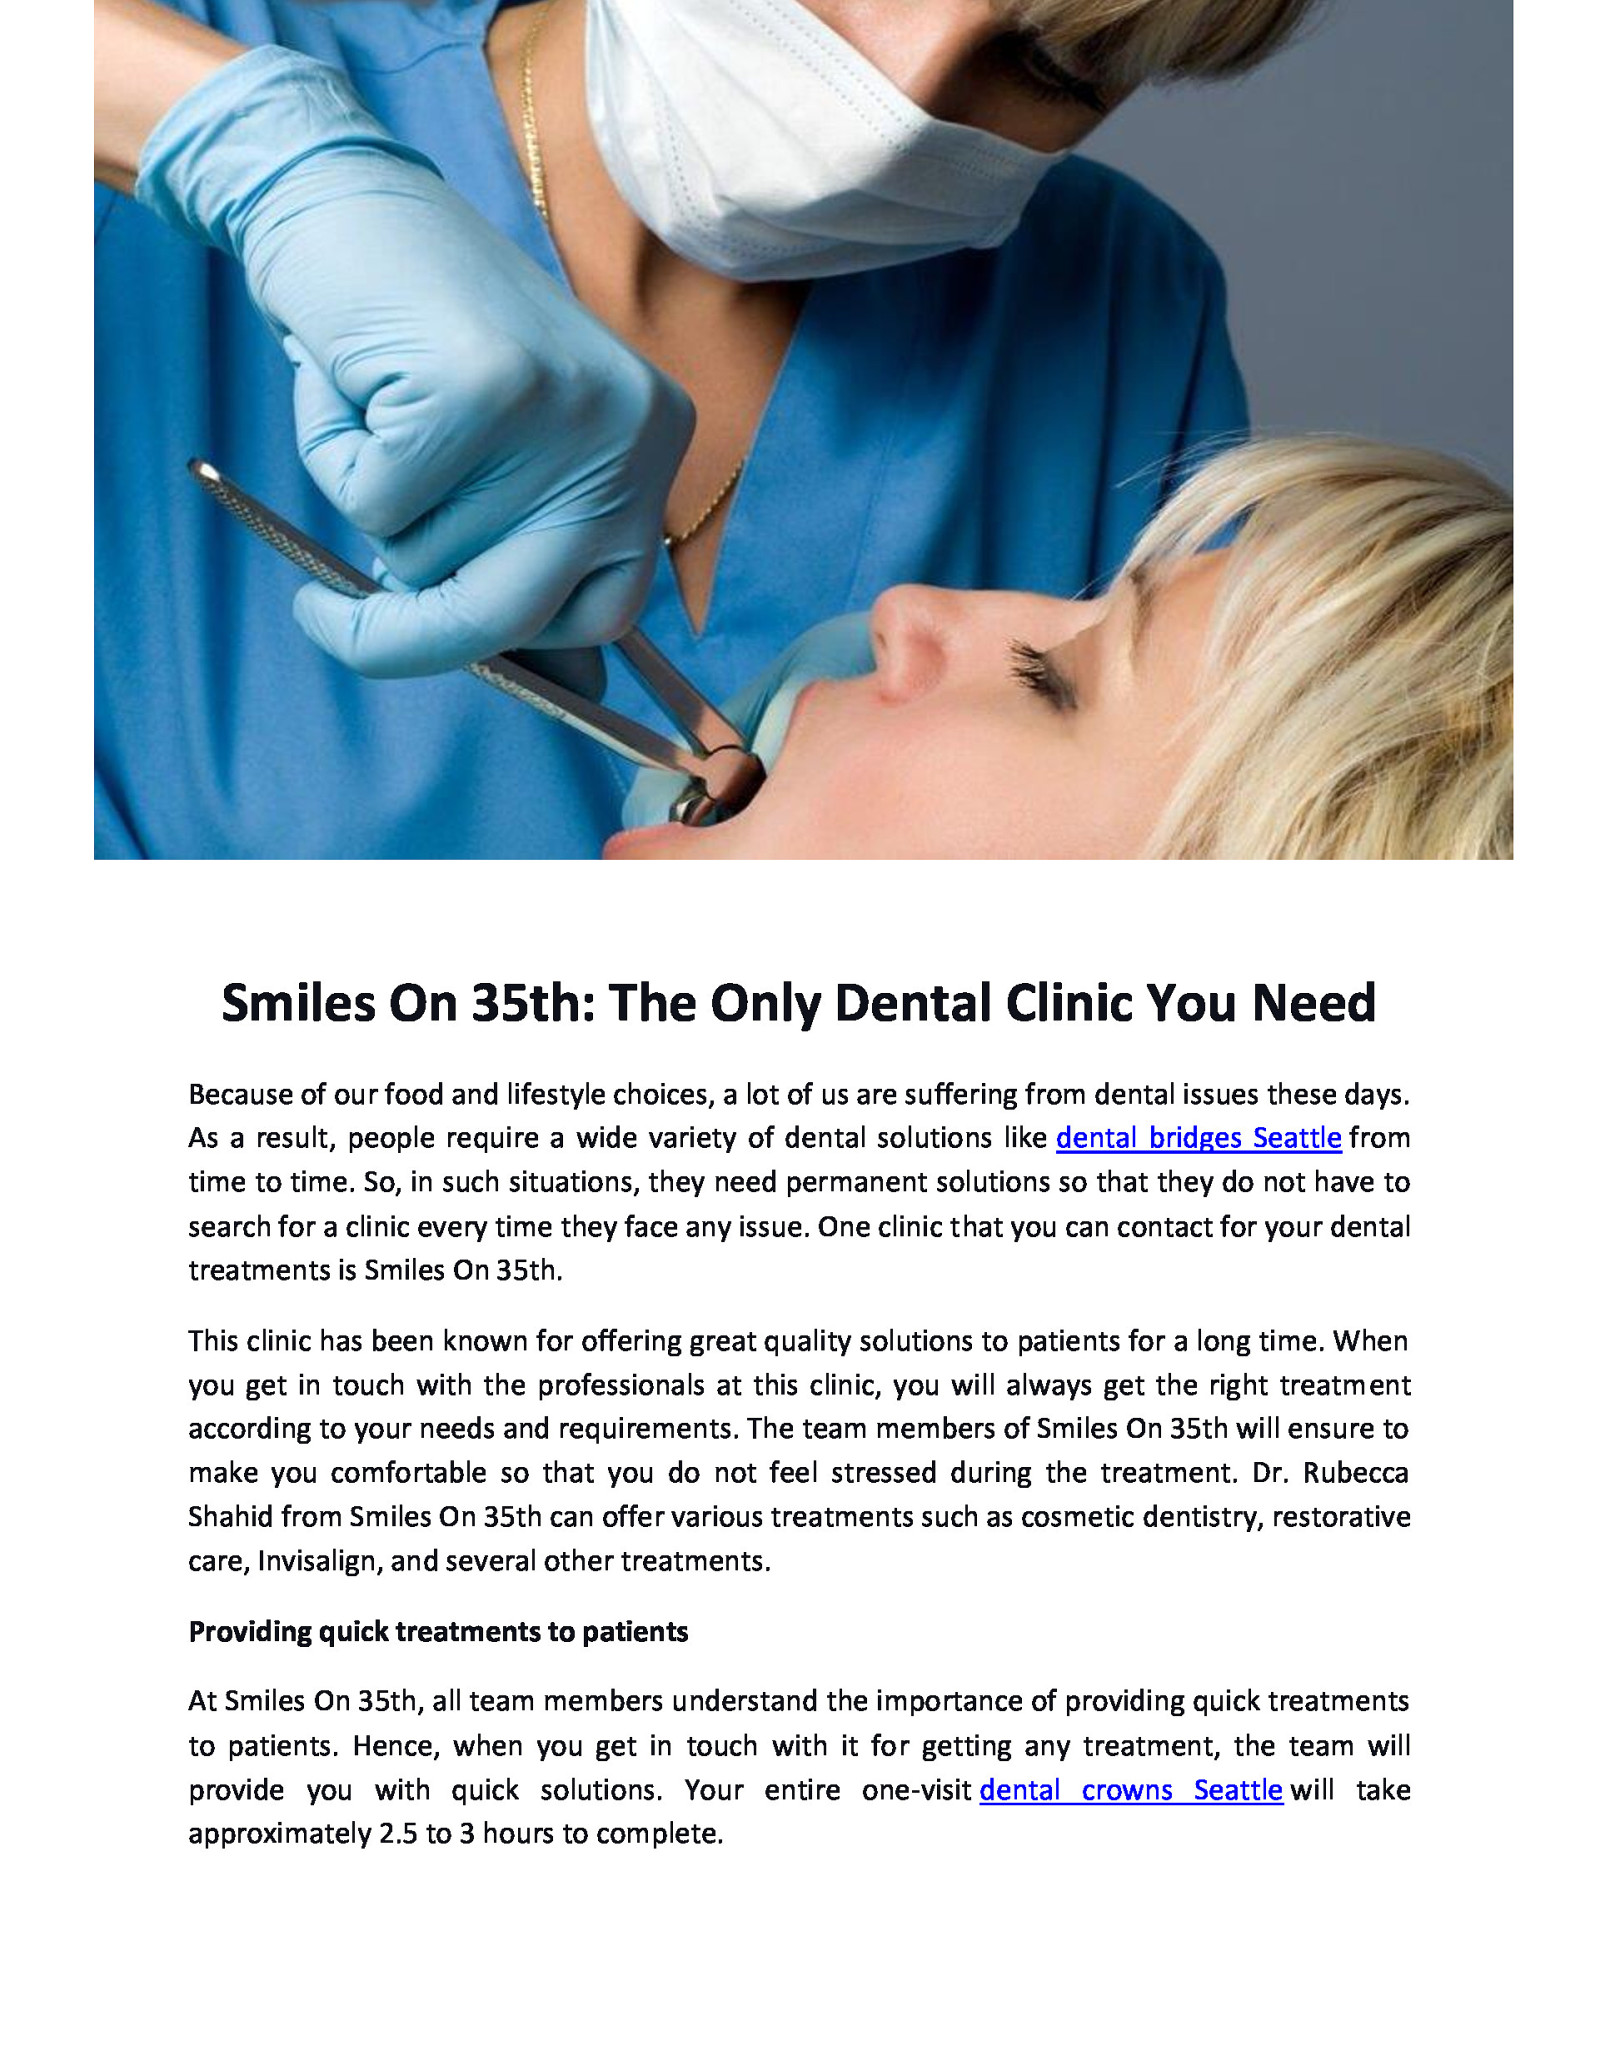 Smiles On 35th: The Only Dental Clinic You Need